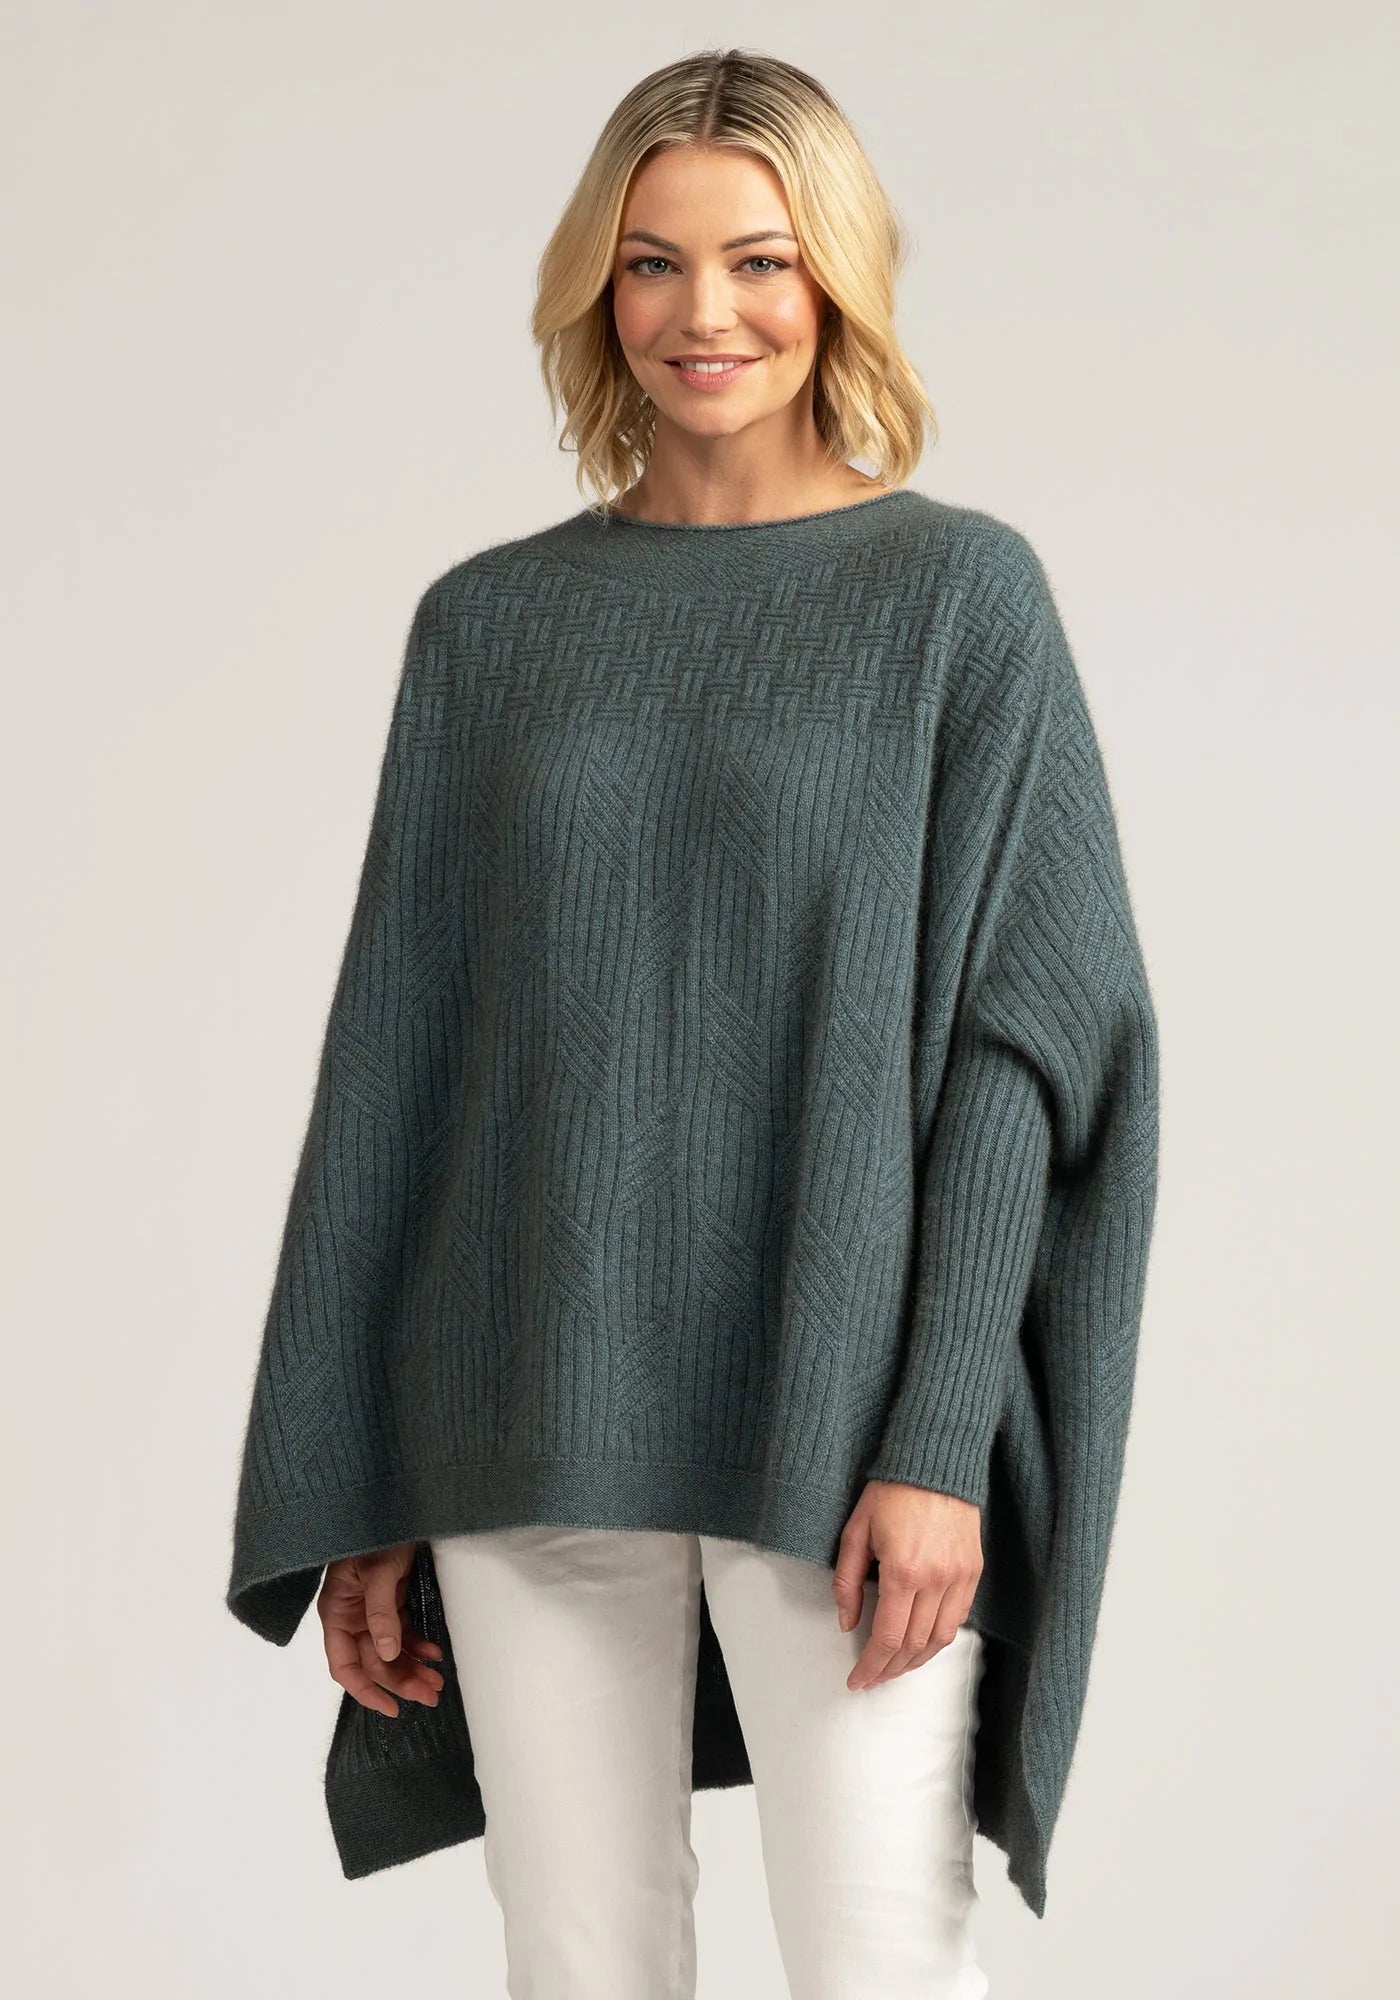 Weave Sweater - One Size